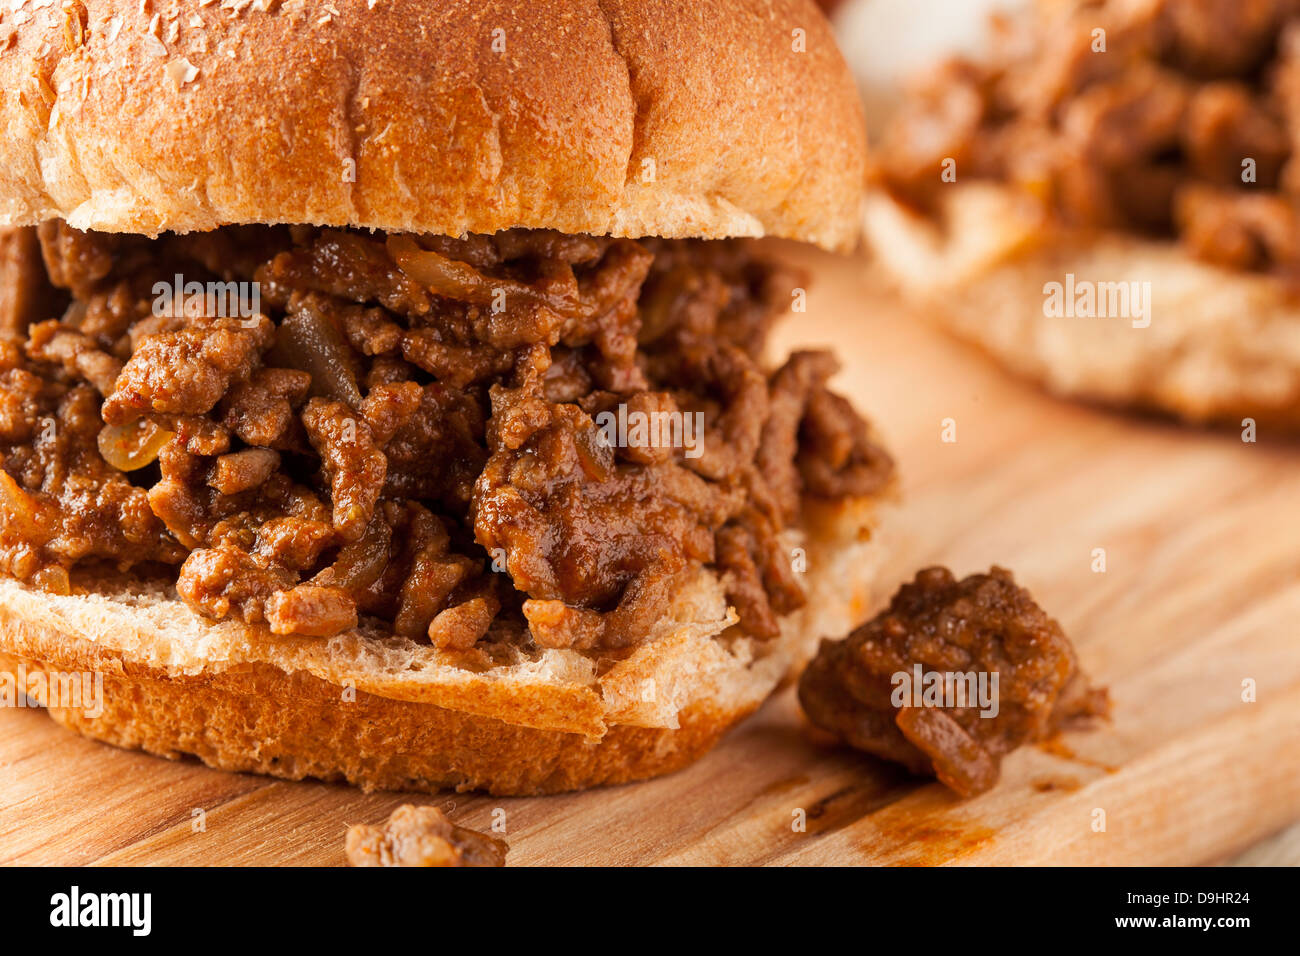 Sloppy Barbecue Beef Sandwich on a whole wheat bun Stock Photo